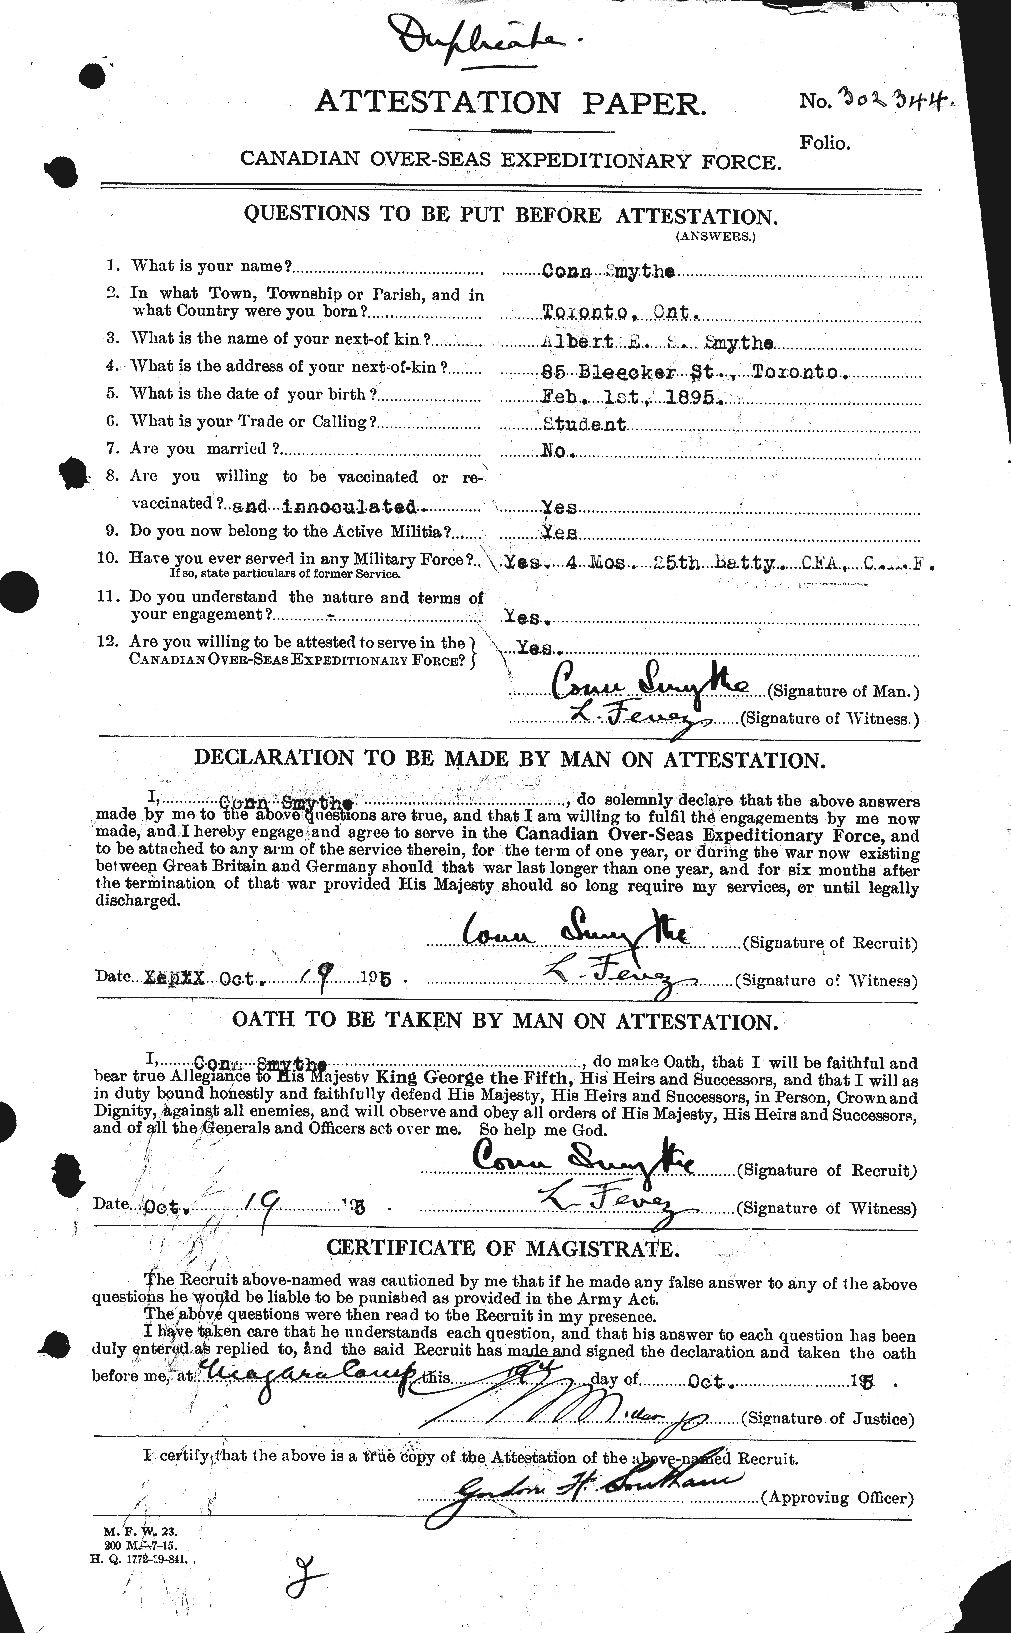 Personnel Records of the First World War - CEF 105864a